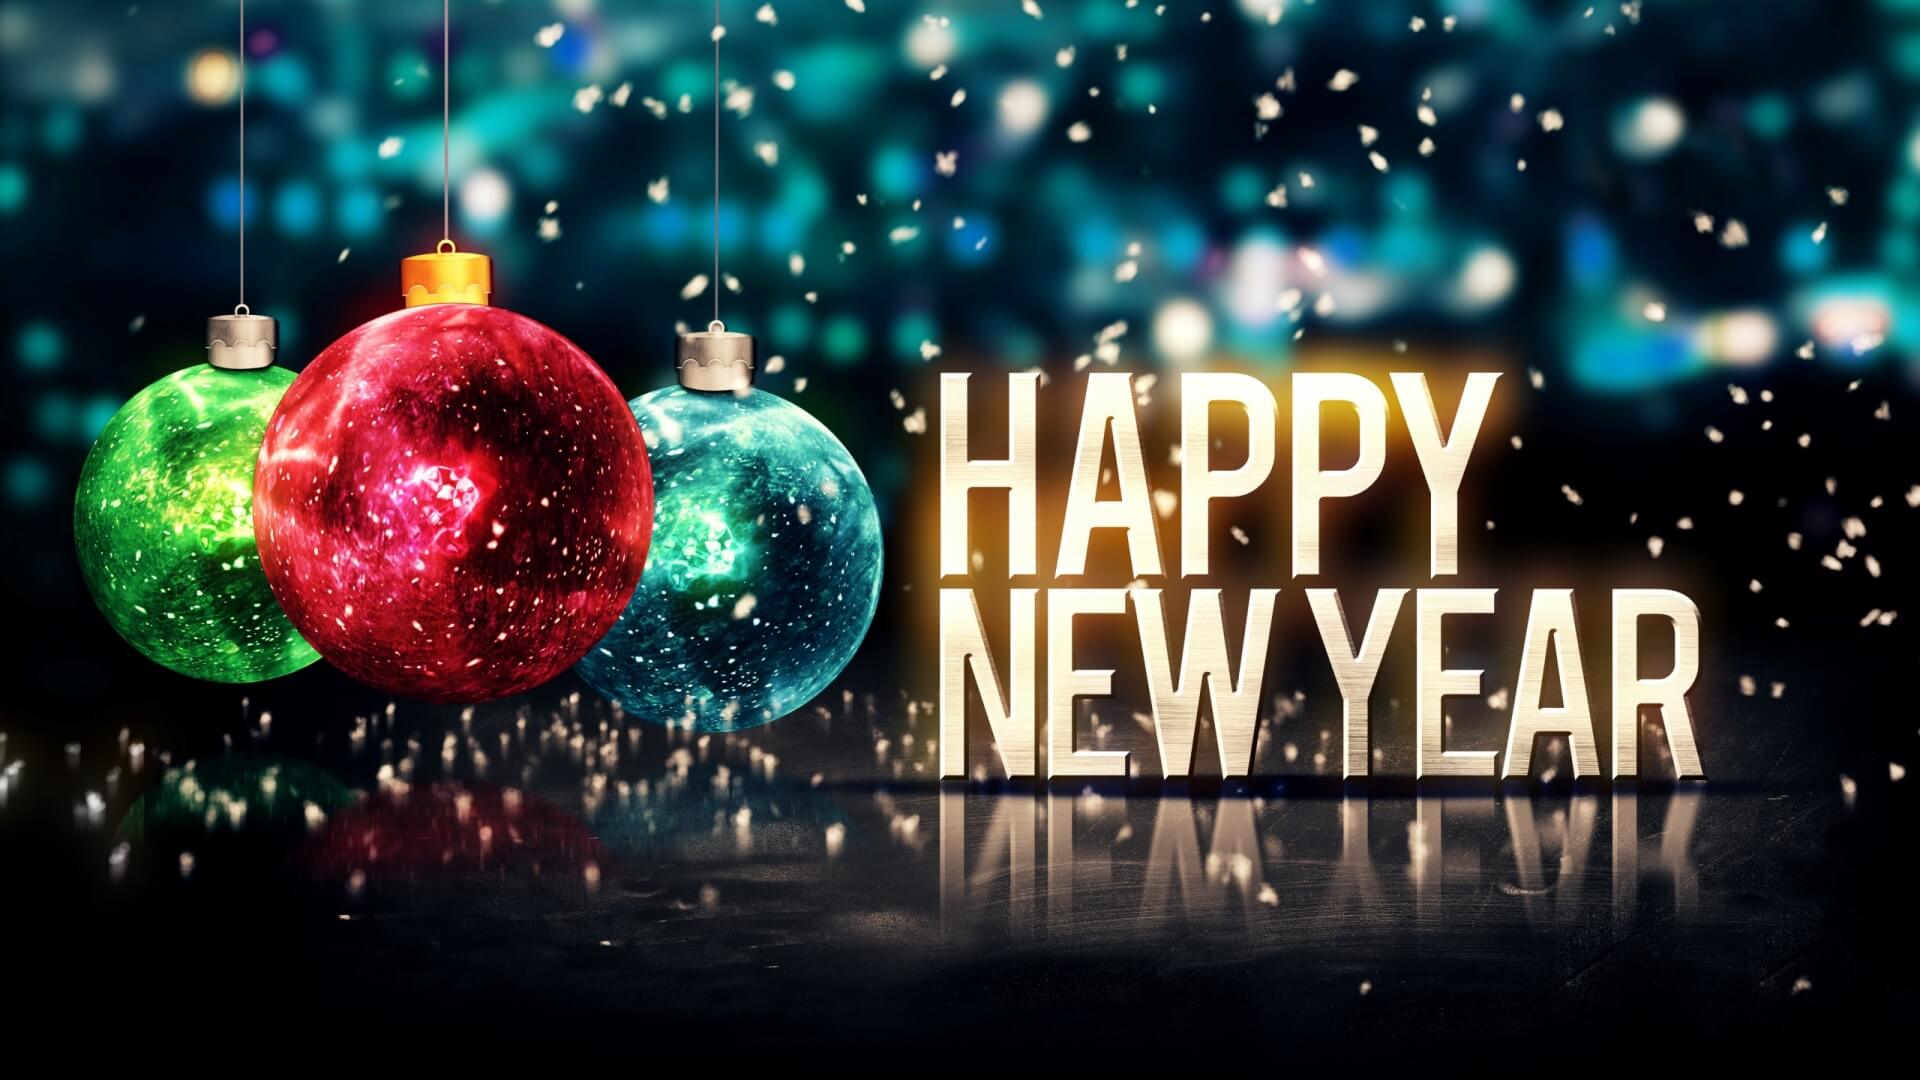 Happy New Year full hd wallpaper, photo, image, picture